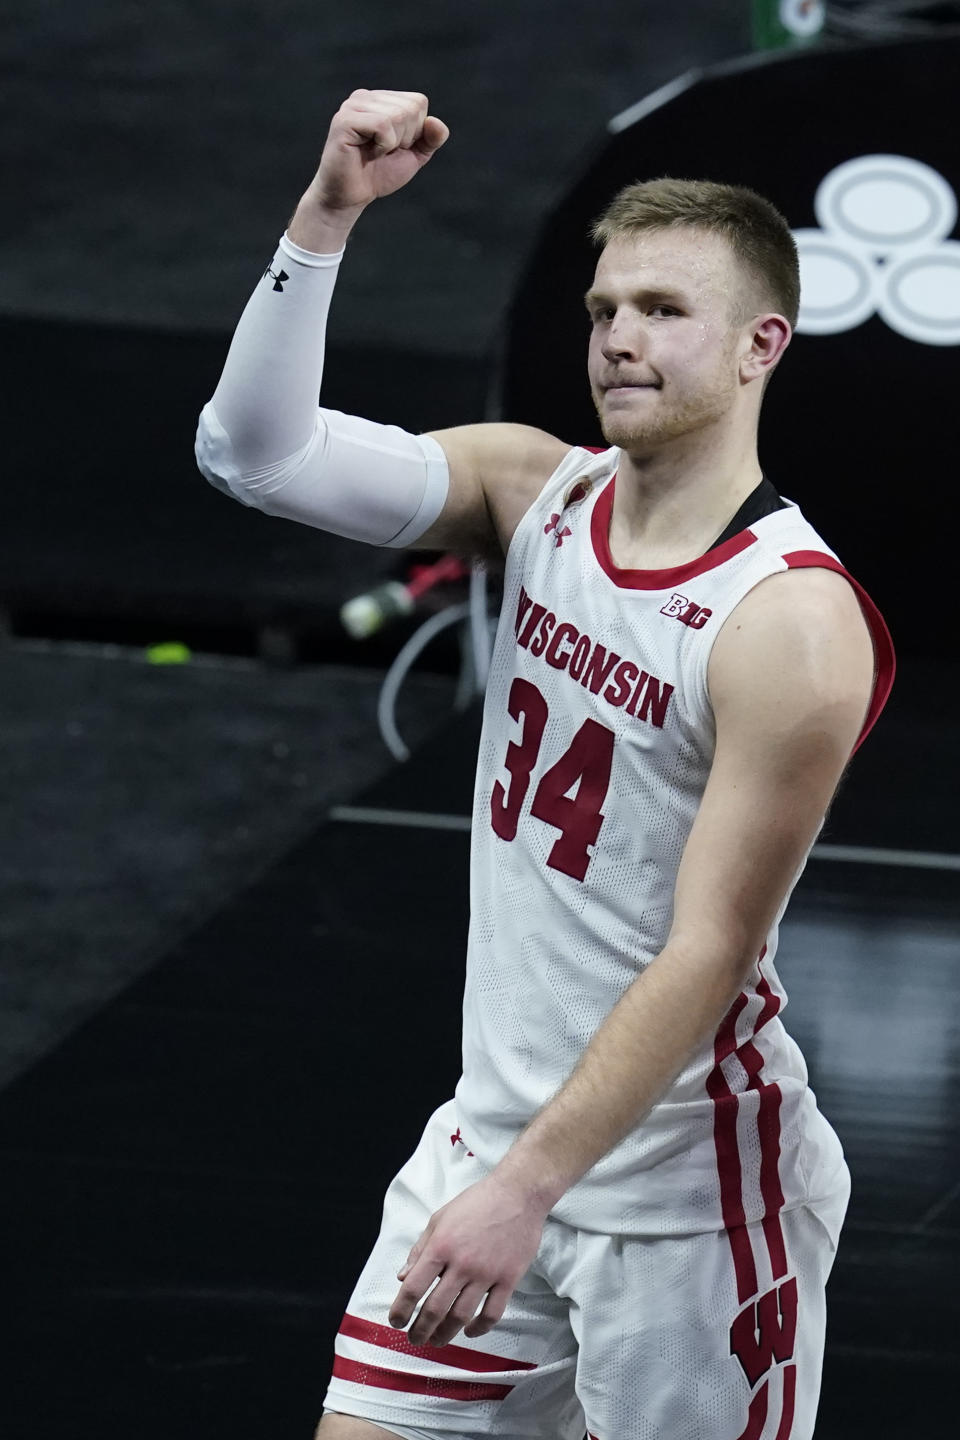 Wisconsin's Brad Davison celebrates as he leaves the court following an NCAA college basketball game against Penn State at the Big Ten Conference tournament, Thursday, March 11, 2021, in Indianapolis. Wisconsin won 75-74. (AP Photo/Darron Cummings)